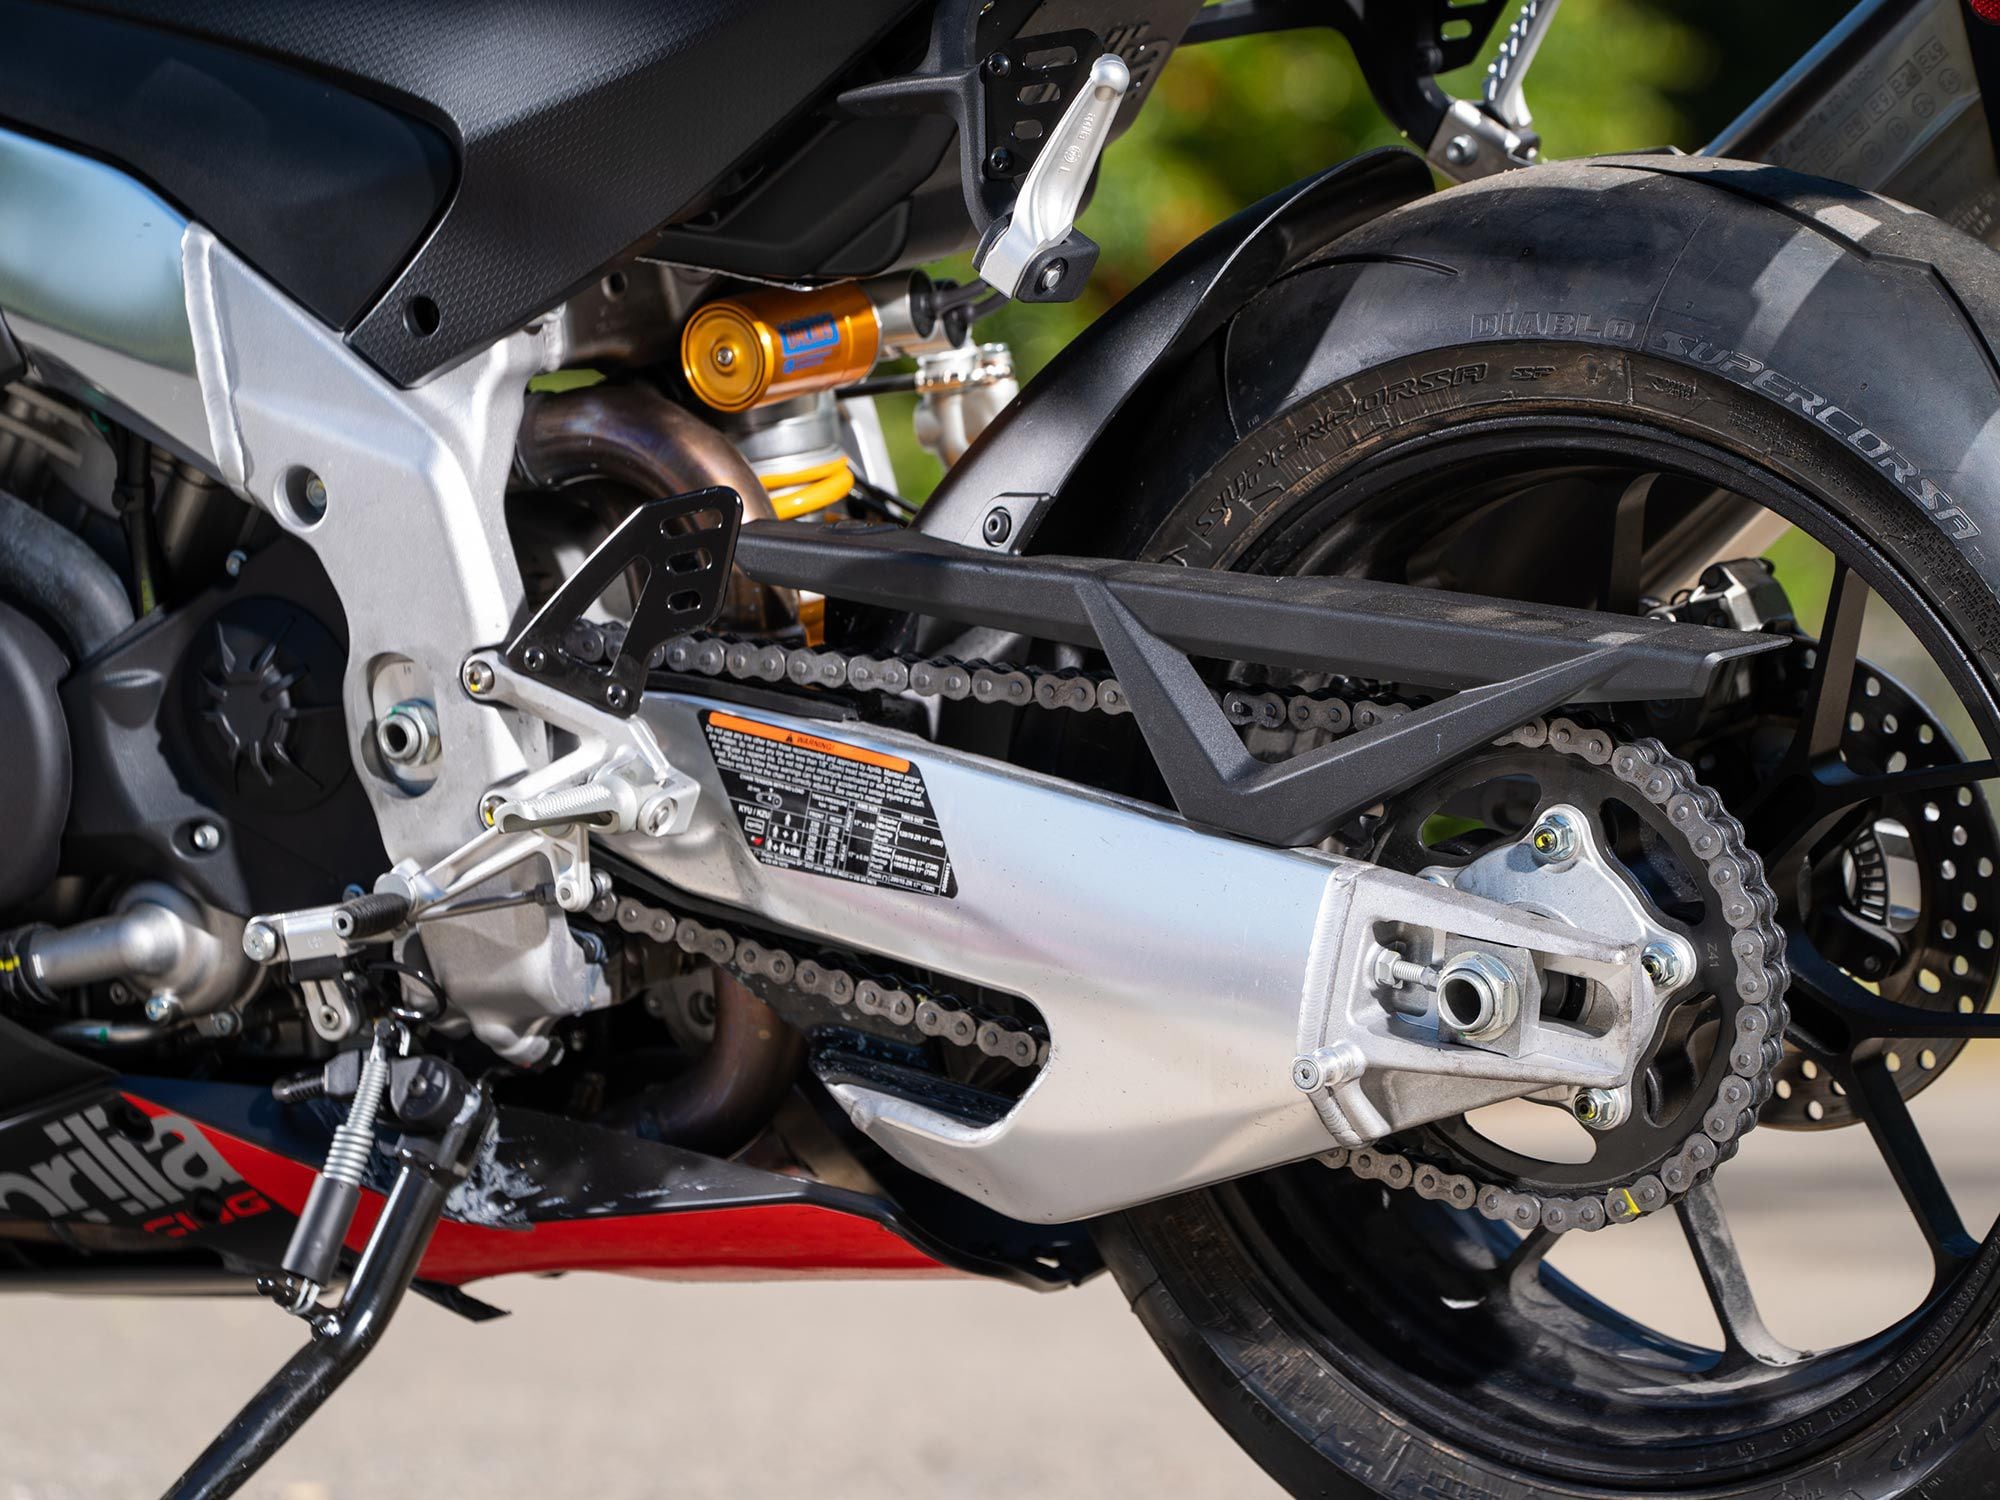 A redesigned swingarm affords tremendous grip off turns and is a big improvement over the previous model.